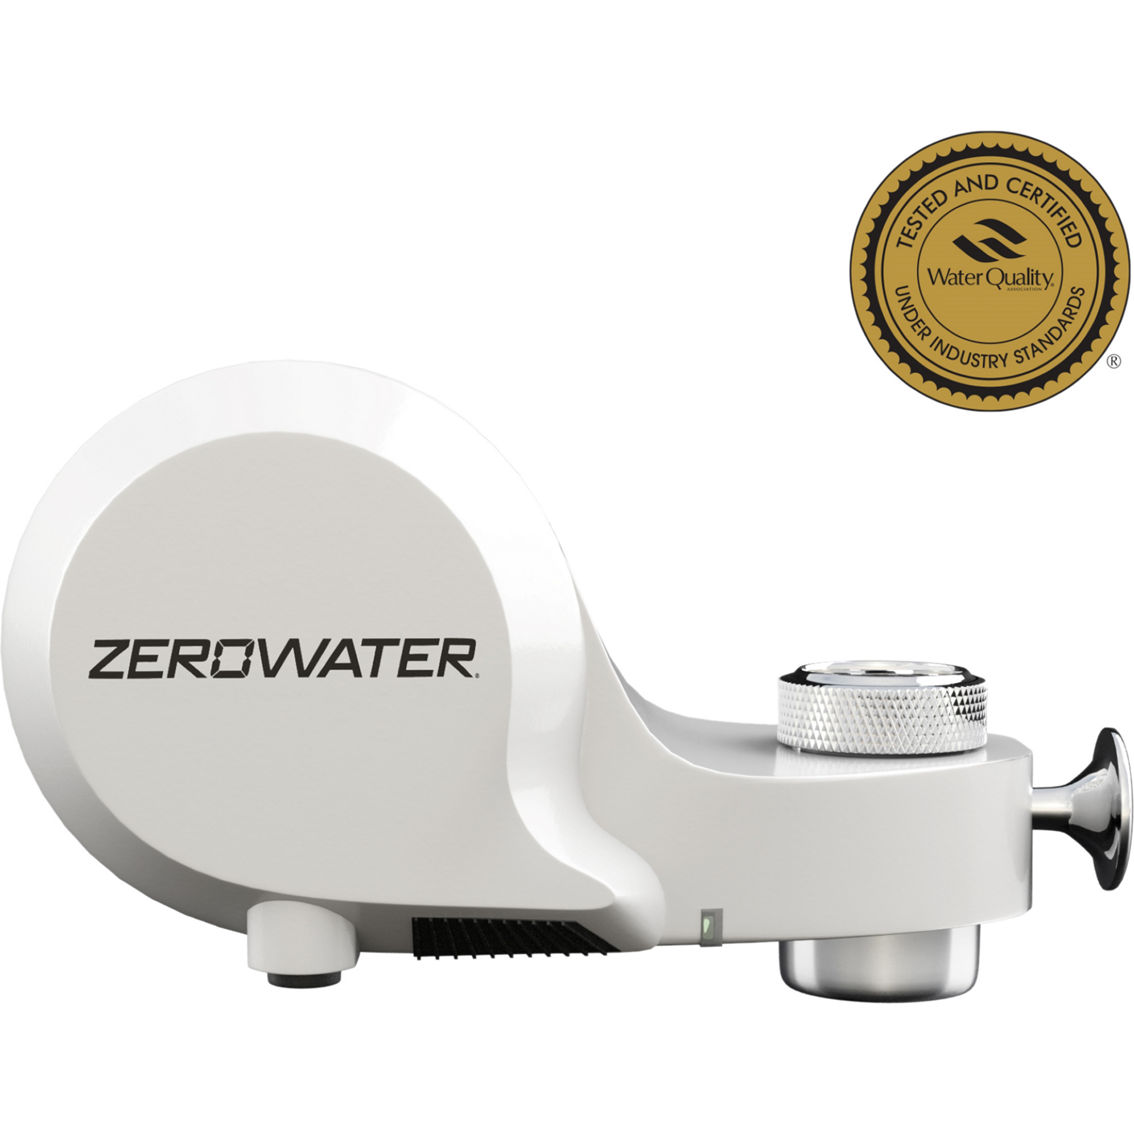 ZeroWater ExtremeLife White Faucet Mount Filtration System for Sink - Image 2 of 8